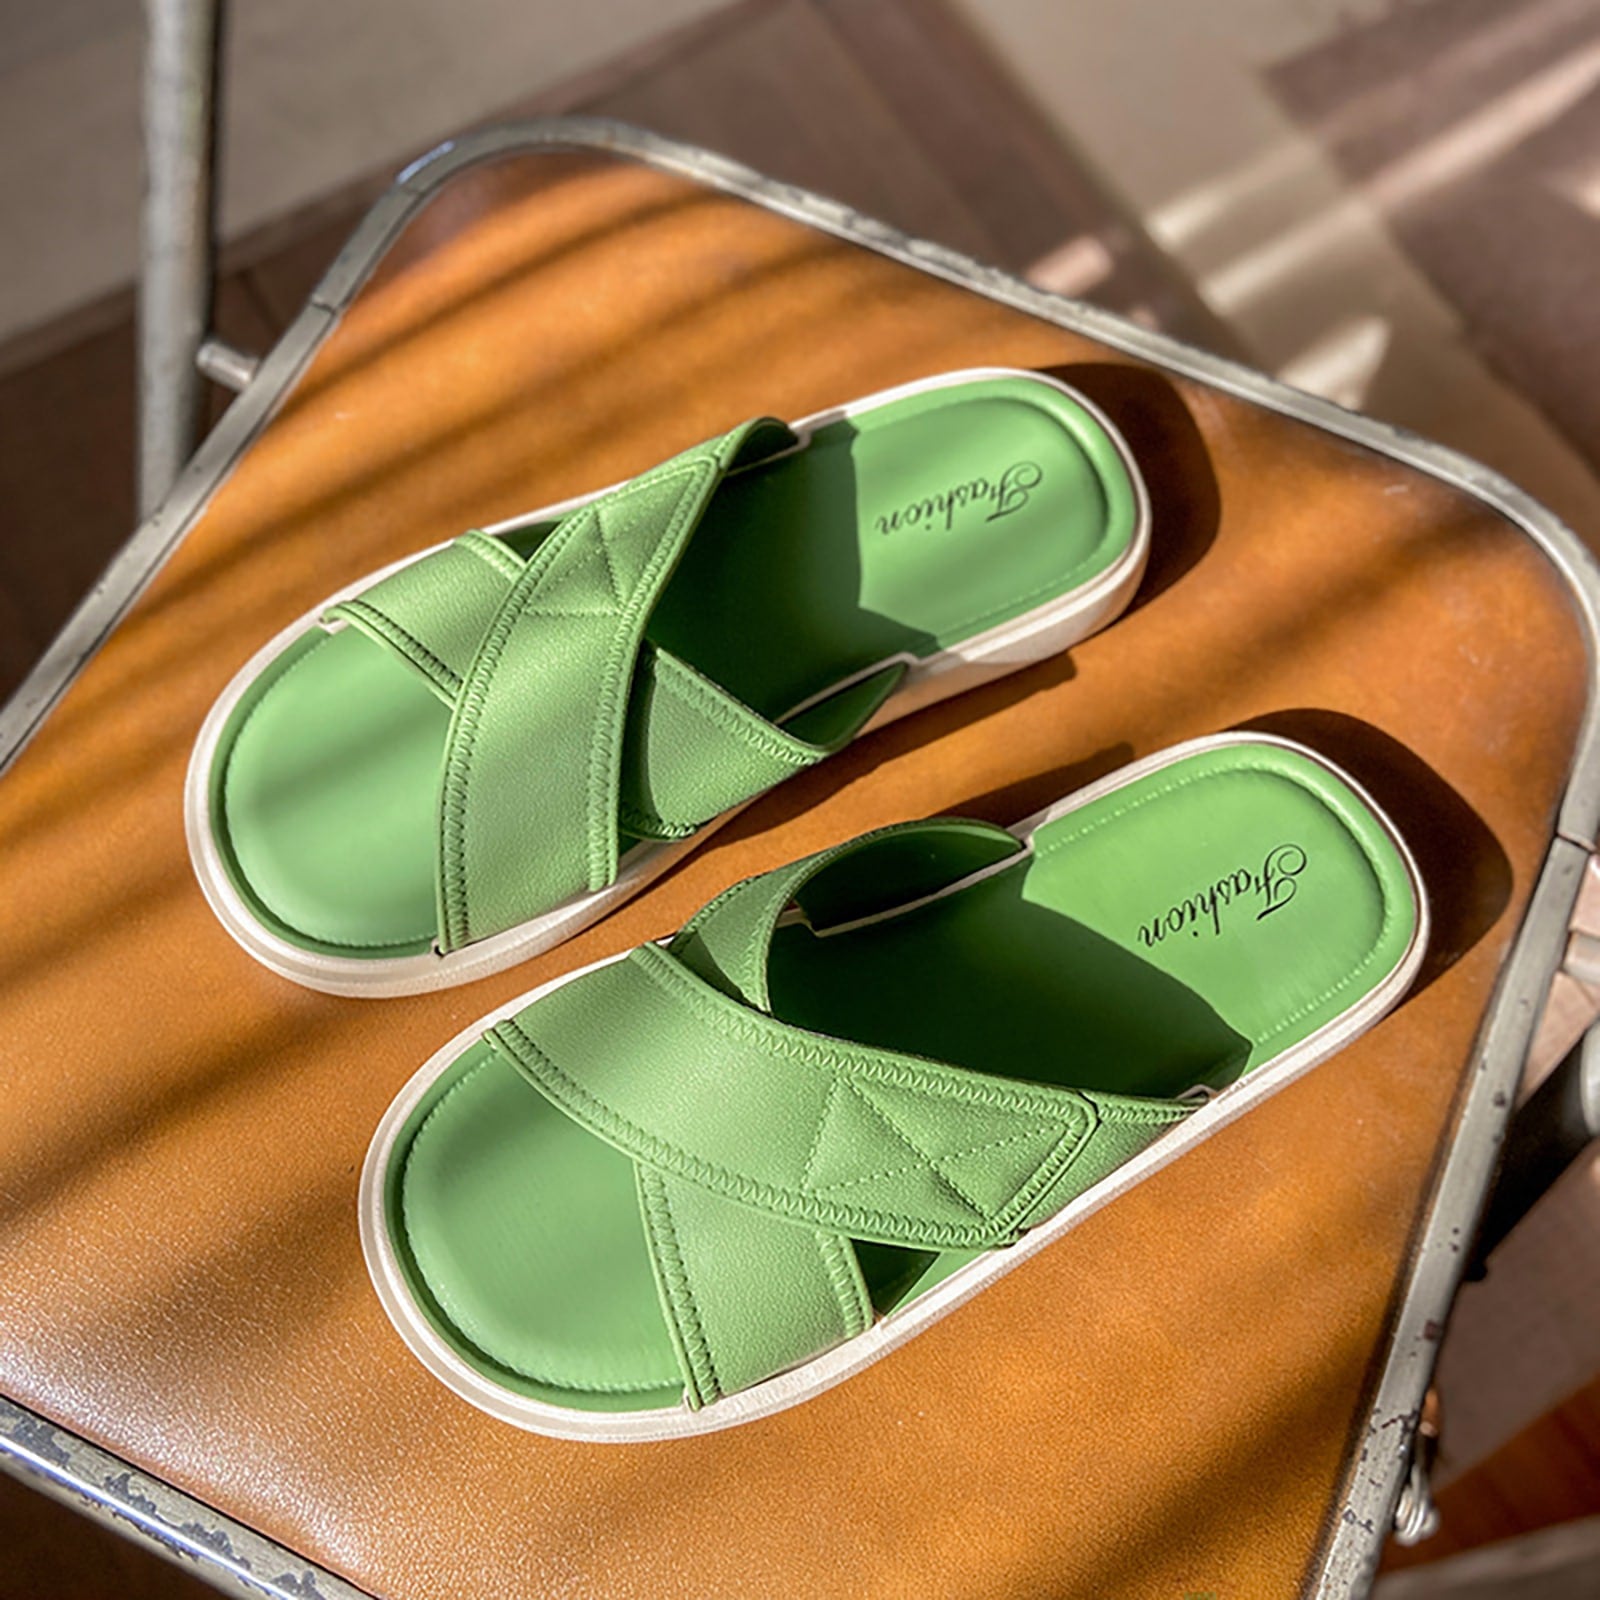 New Arrival Simple, Elegant And Versatile Slippers With Soft Pvc Outsole For Anti-Slip On The Beach And In Home Bathroom - Suitable For Indoor And Outdoor Wear, Giving You A Chic And Fresh Ins Look-Green-9